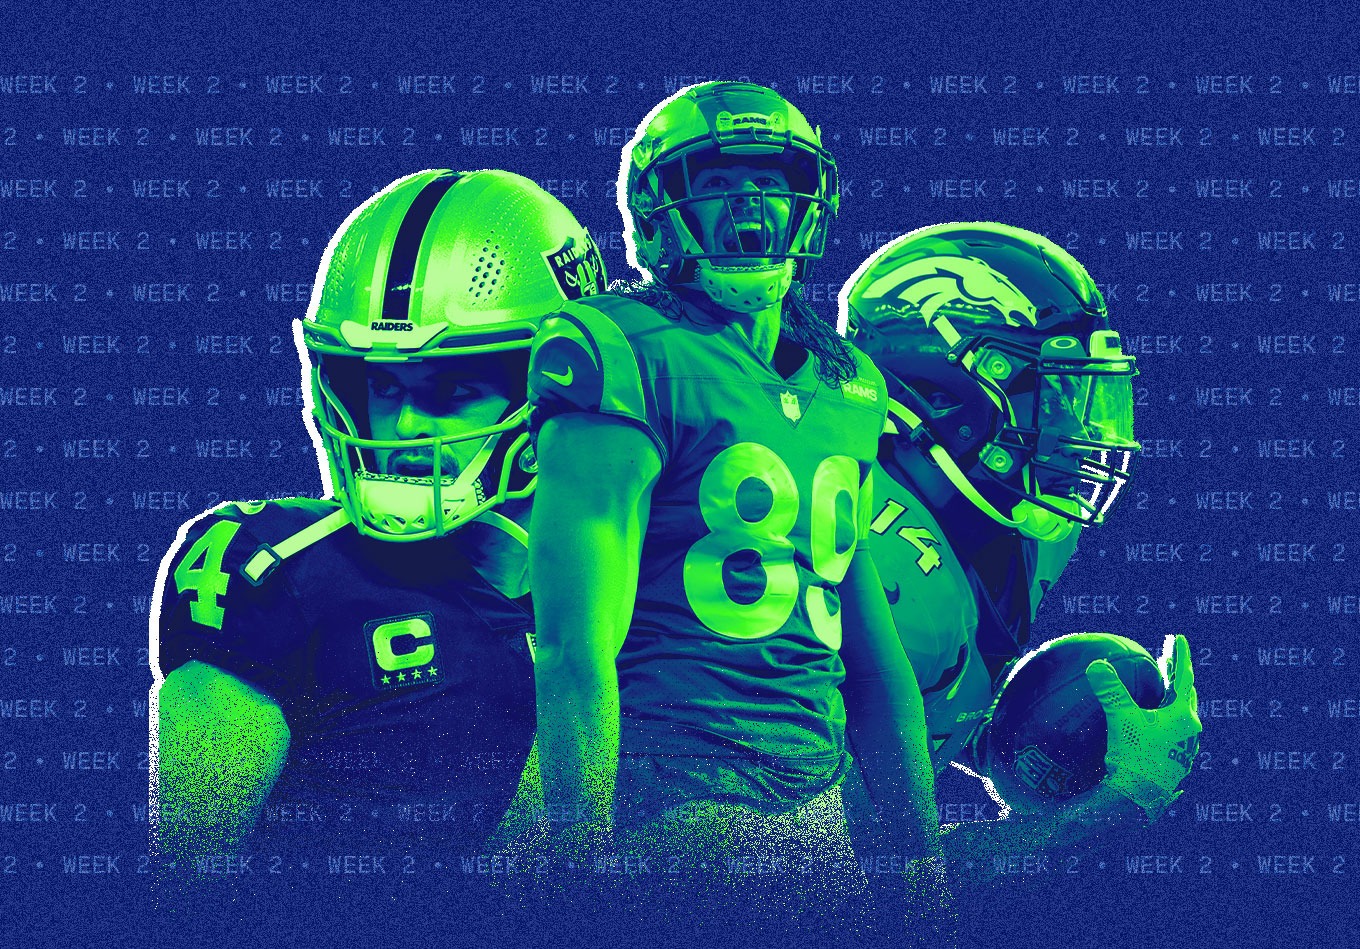 The Yays and Nays: Our Week 2 Fantasy Football Rankings, Projections and Overreactions